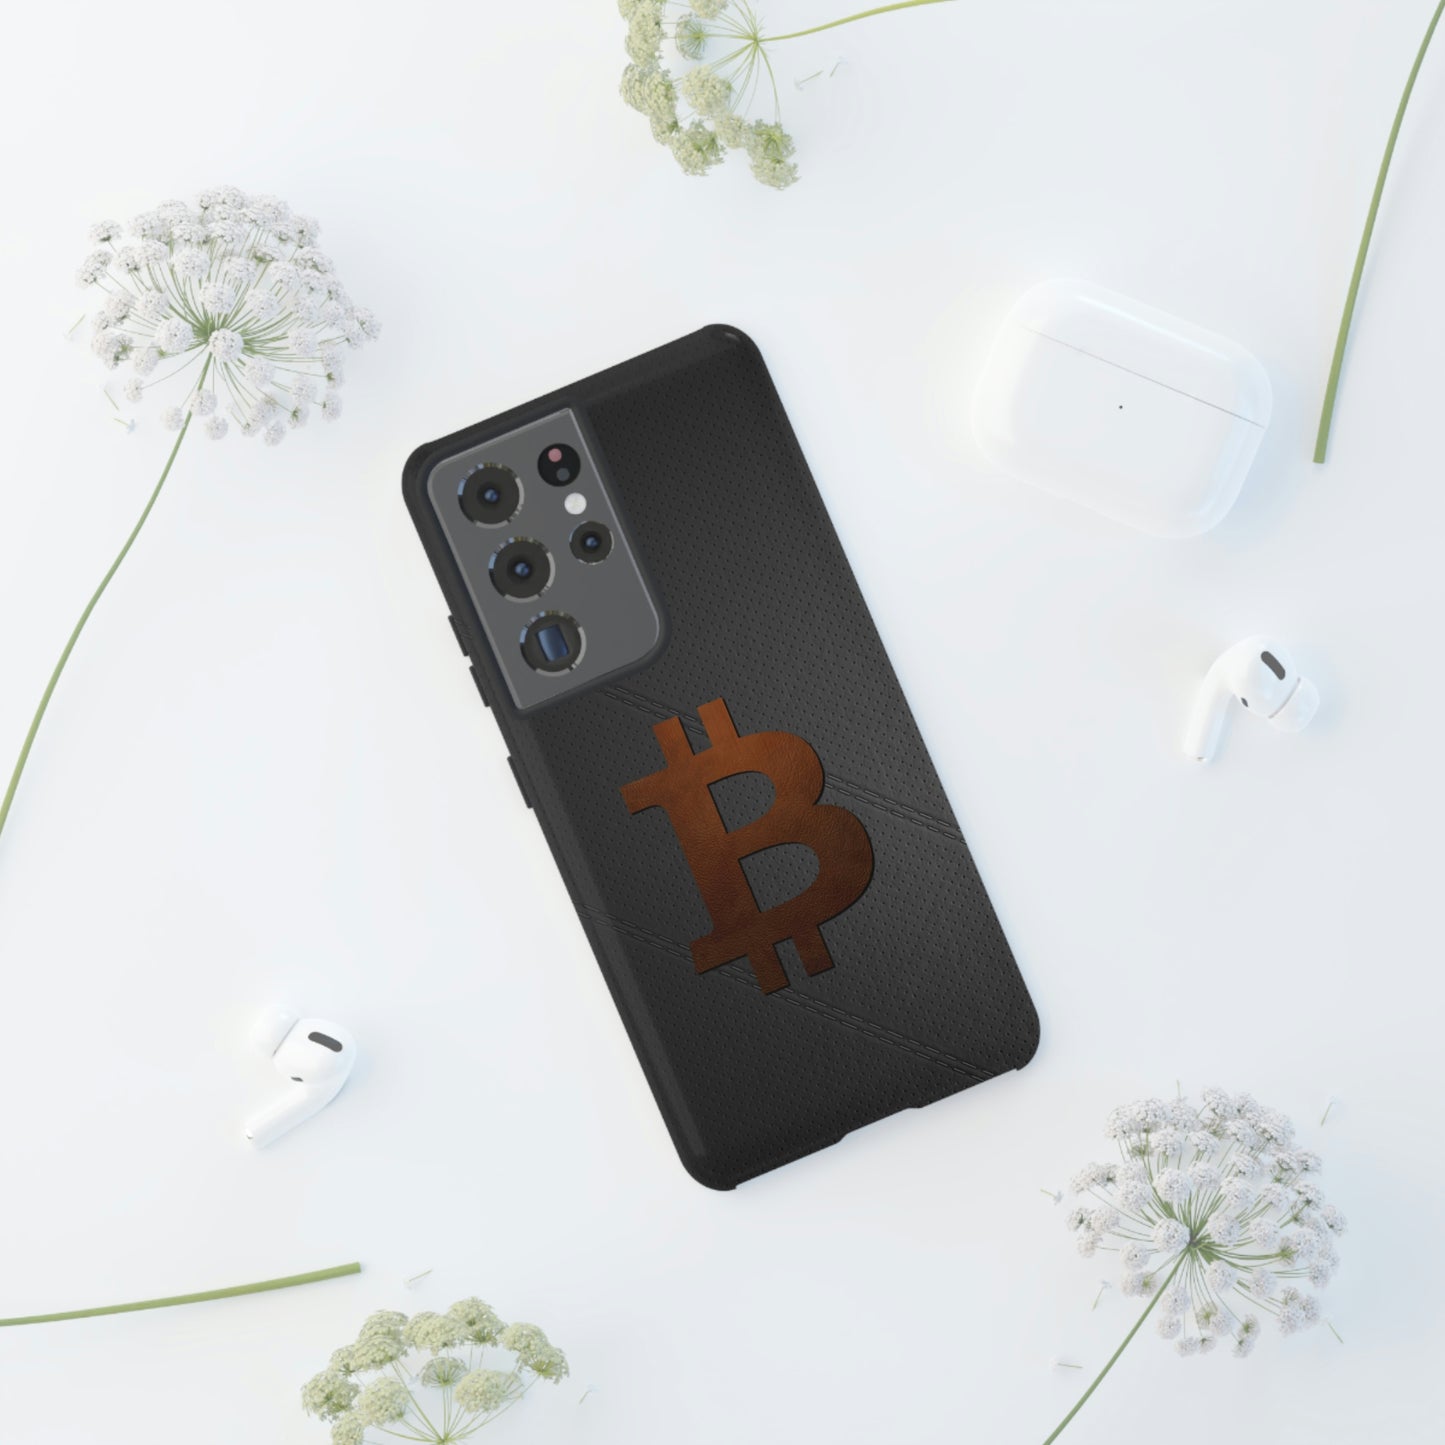 Bitcoin Brown Leather Case